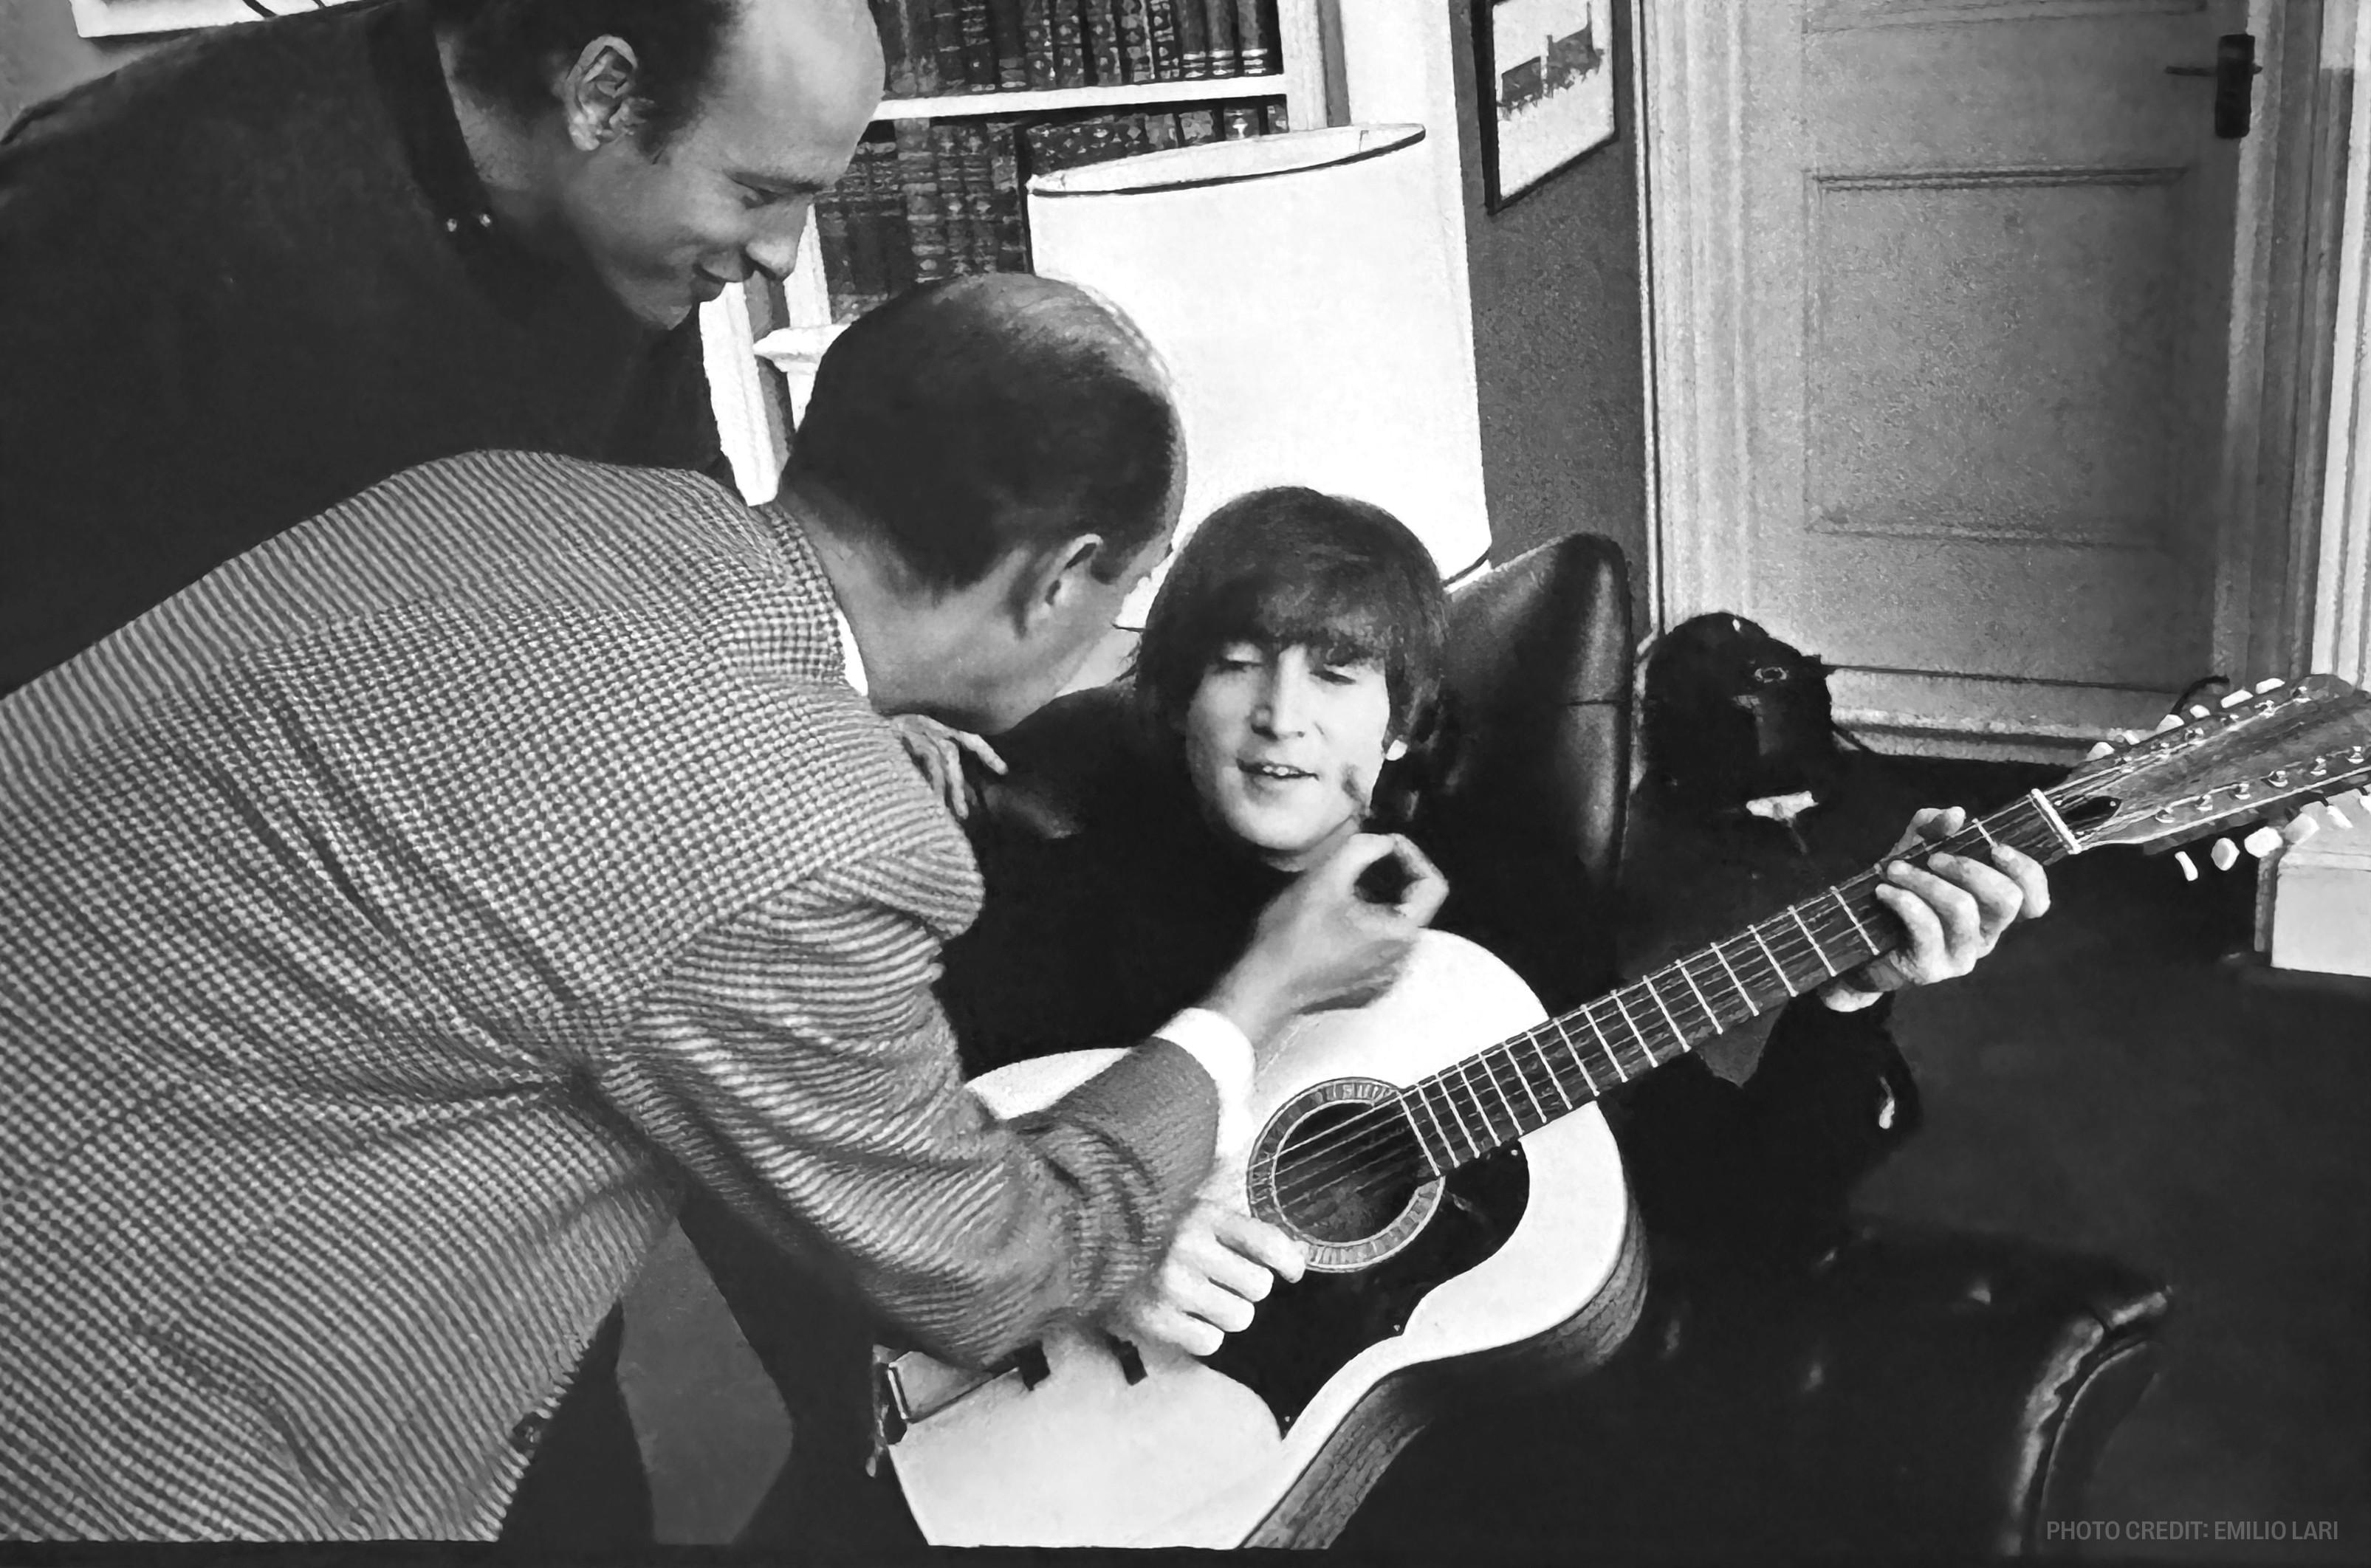 a man is helping a young boy play a guitar in a black and white photo .